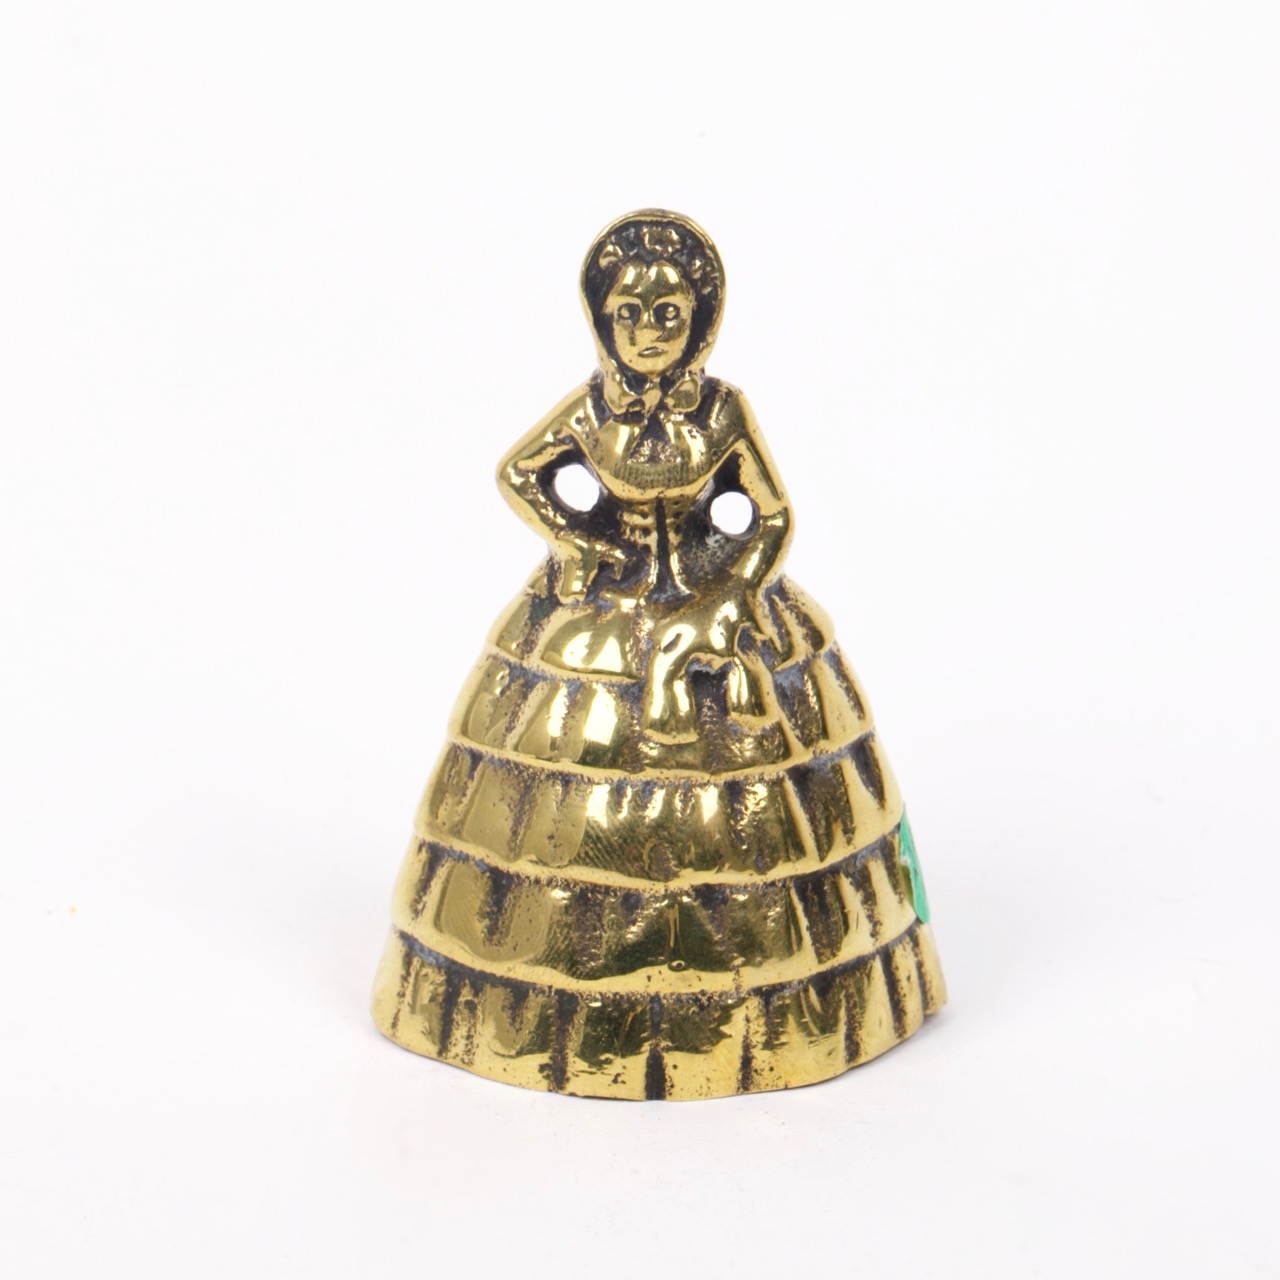 Antique brass bell in a shape of a woman - Antique weapons, collectibles,  silver, icons, bronze, swords, daggers..